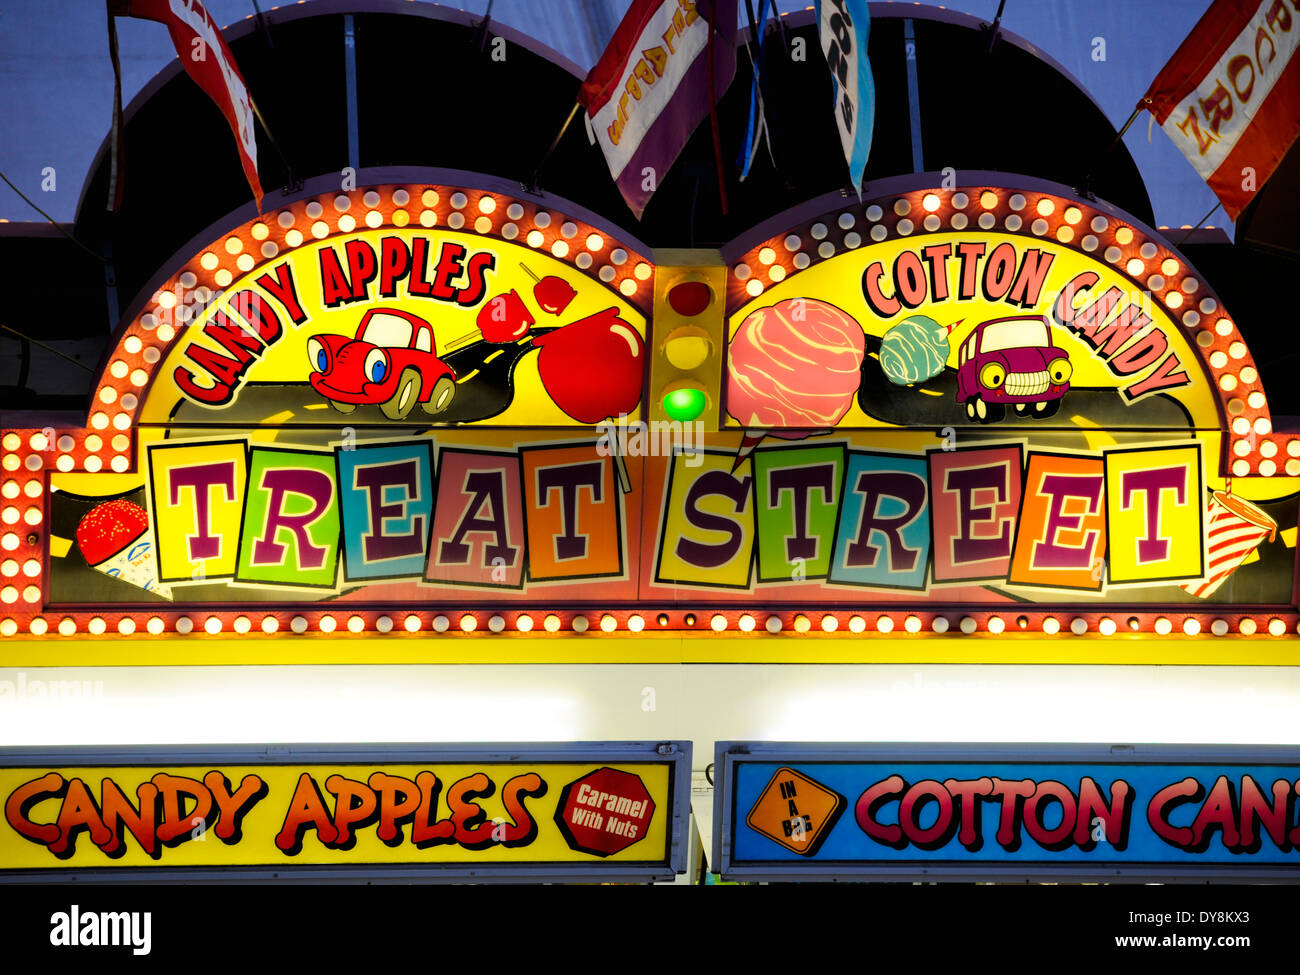 A lighted sign for 'Treat Street' a carnival / fair / festival candy and treats vendor Stock Photo